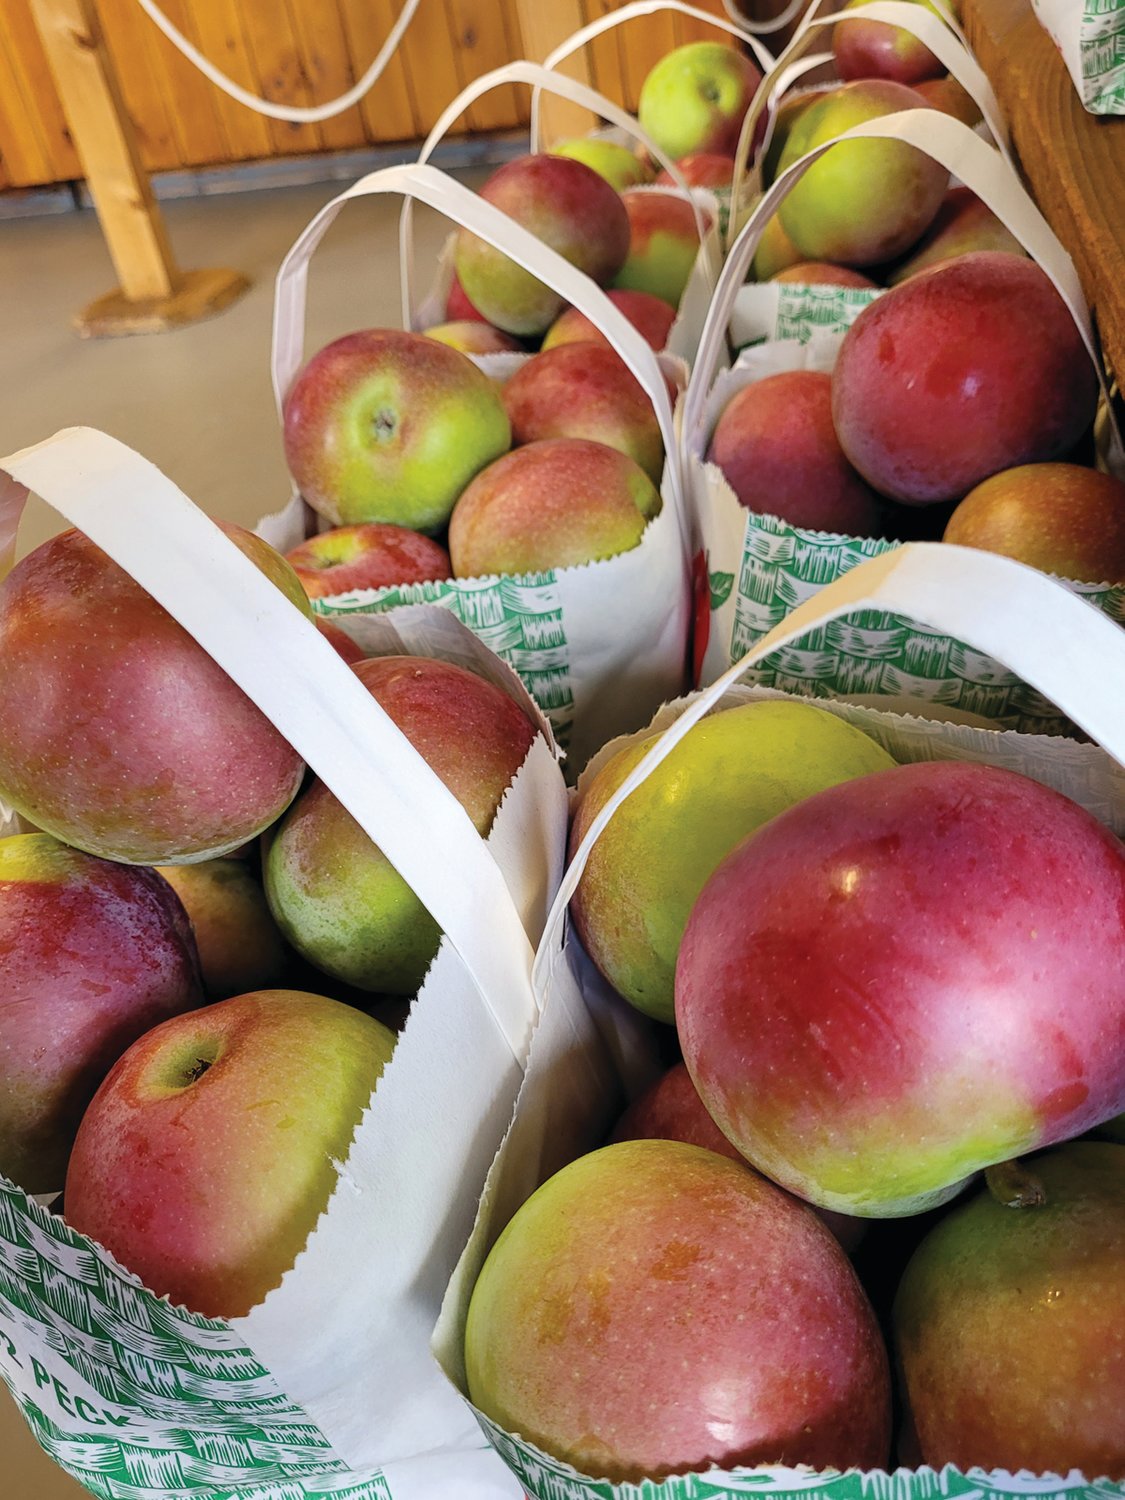 APPLE A DAY: Appleland provides many variety of apples and apple products at its orchard store at 135 Smith Ave.